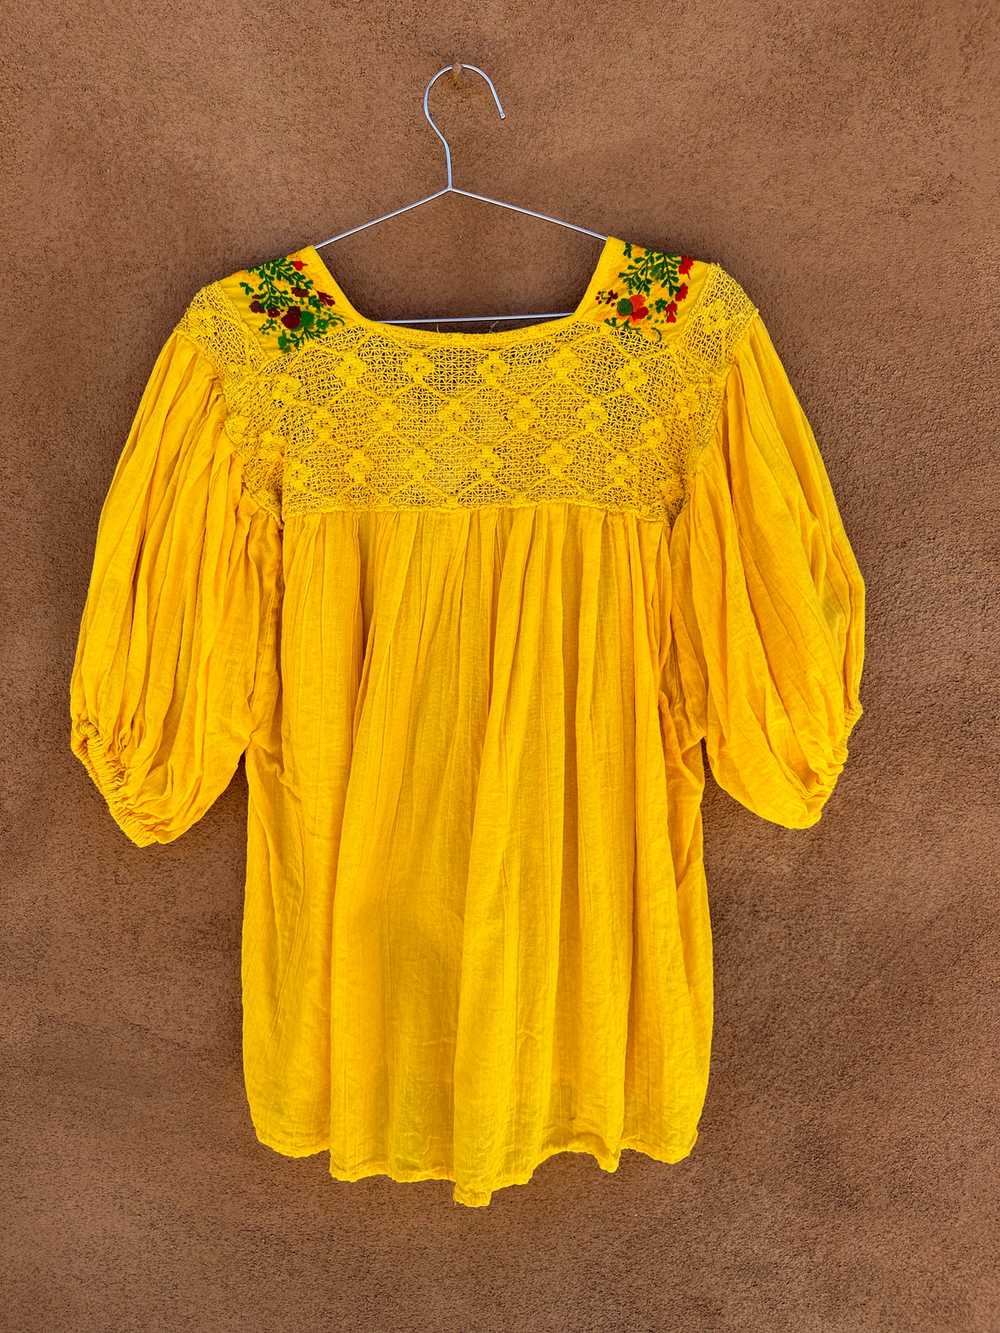 Yellow Embroidered Floral Mexican Blouse - image 3